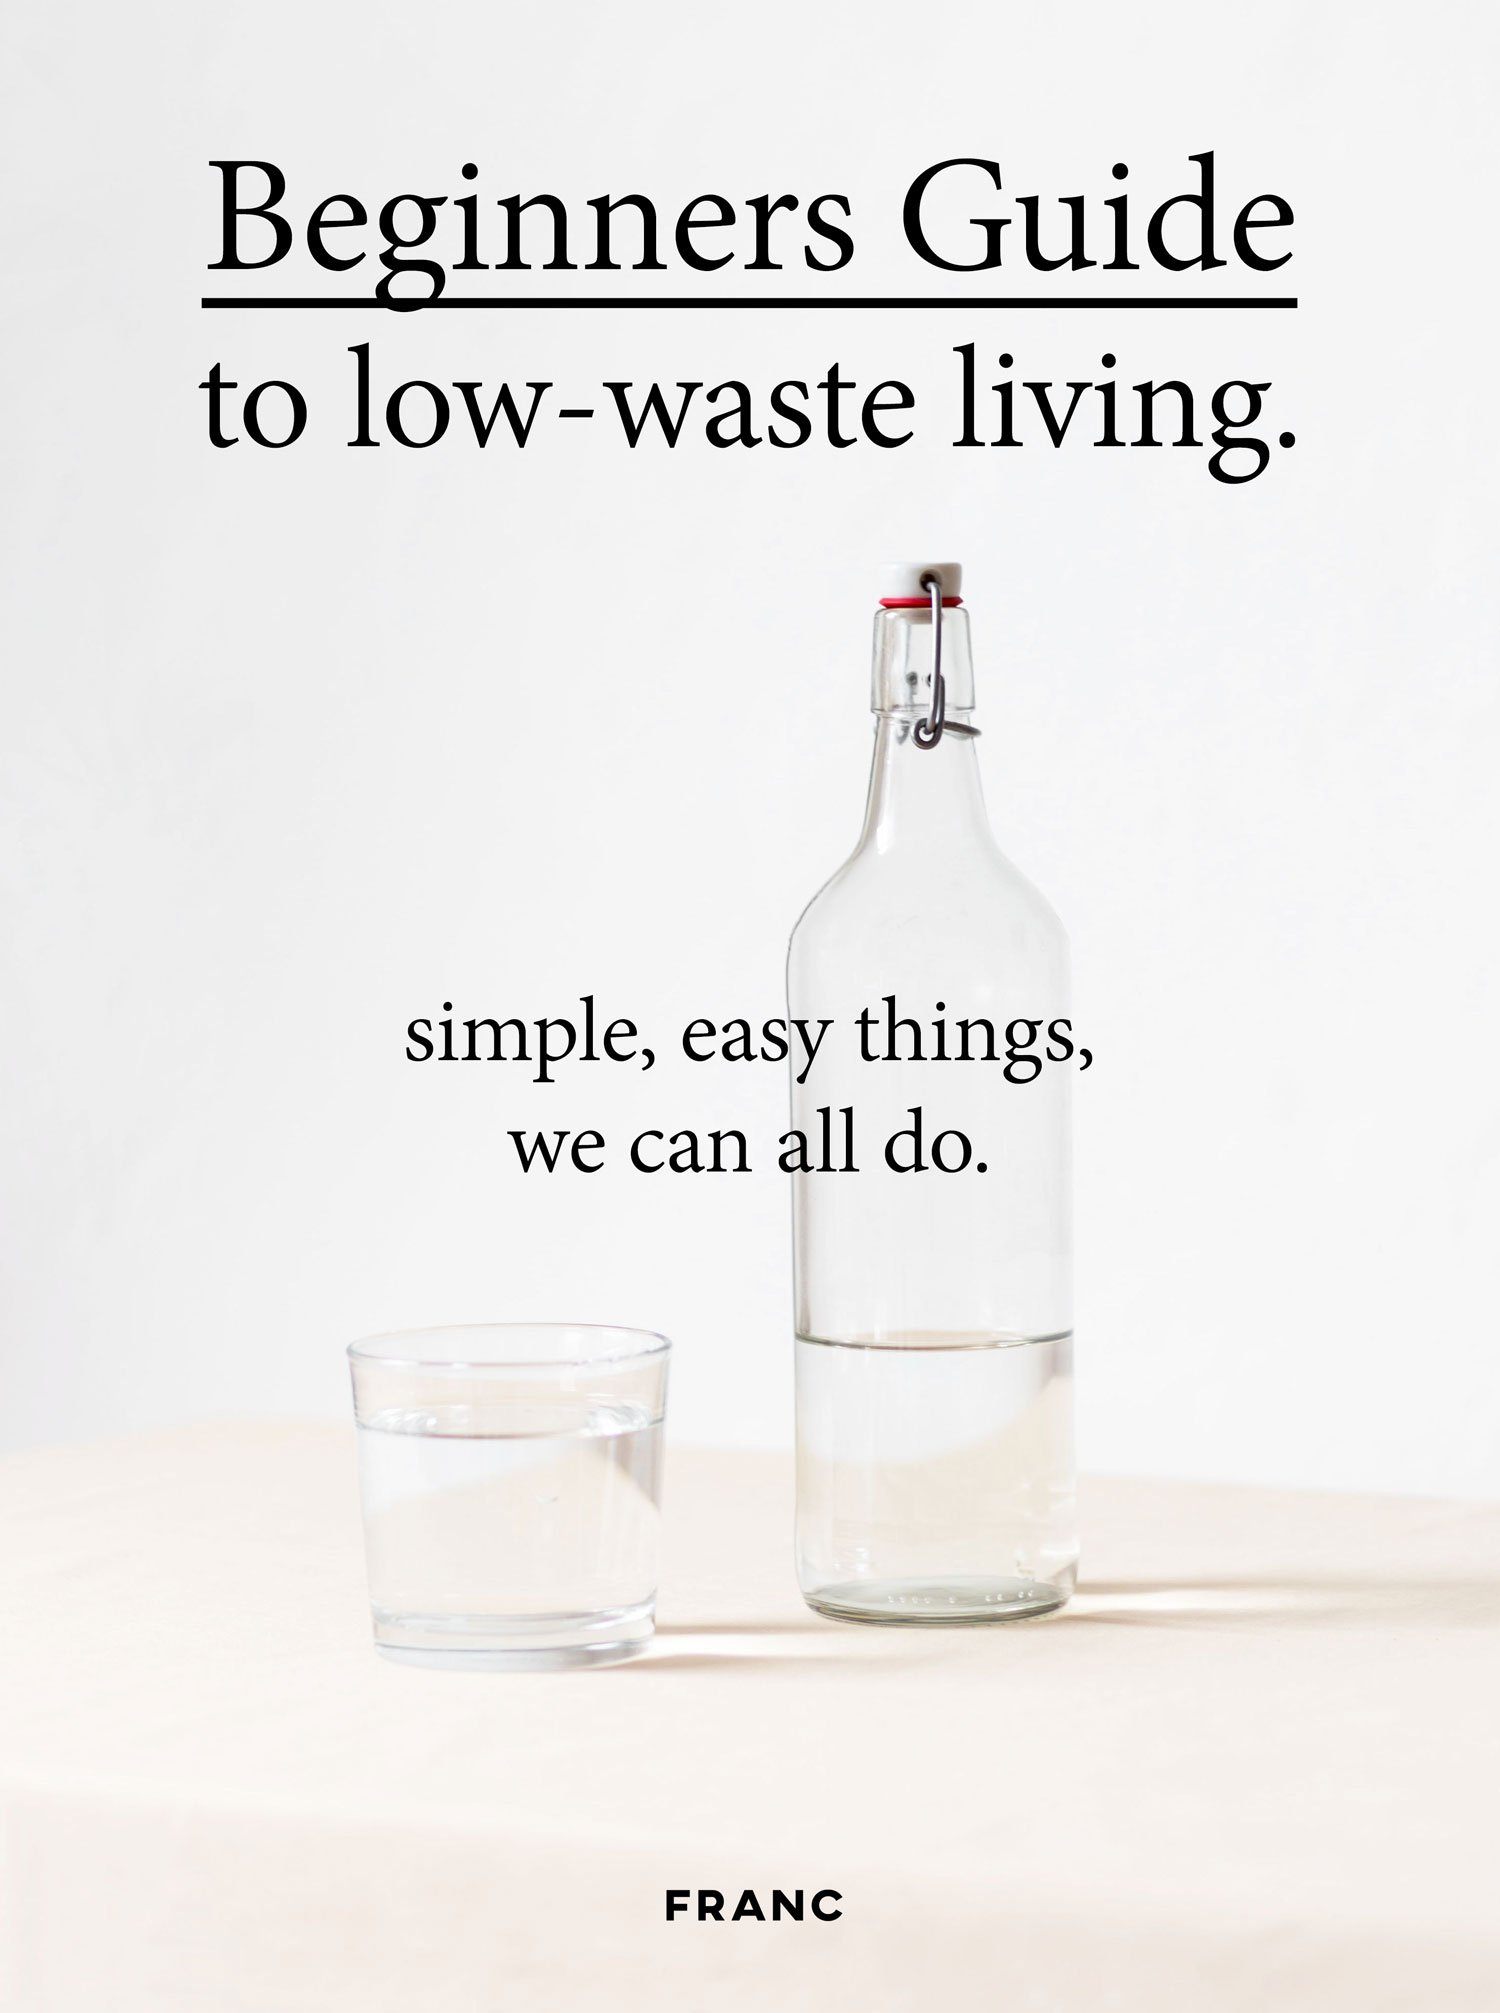 Beginners Guide: To Low Waste-Living - FRANC